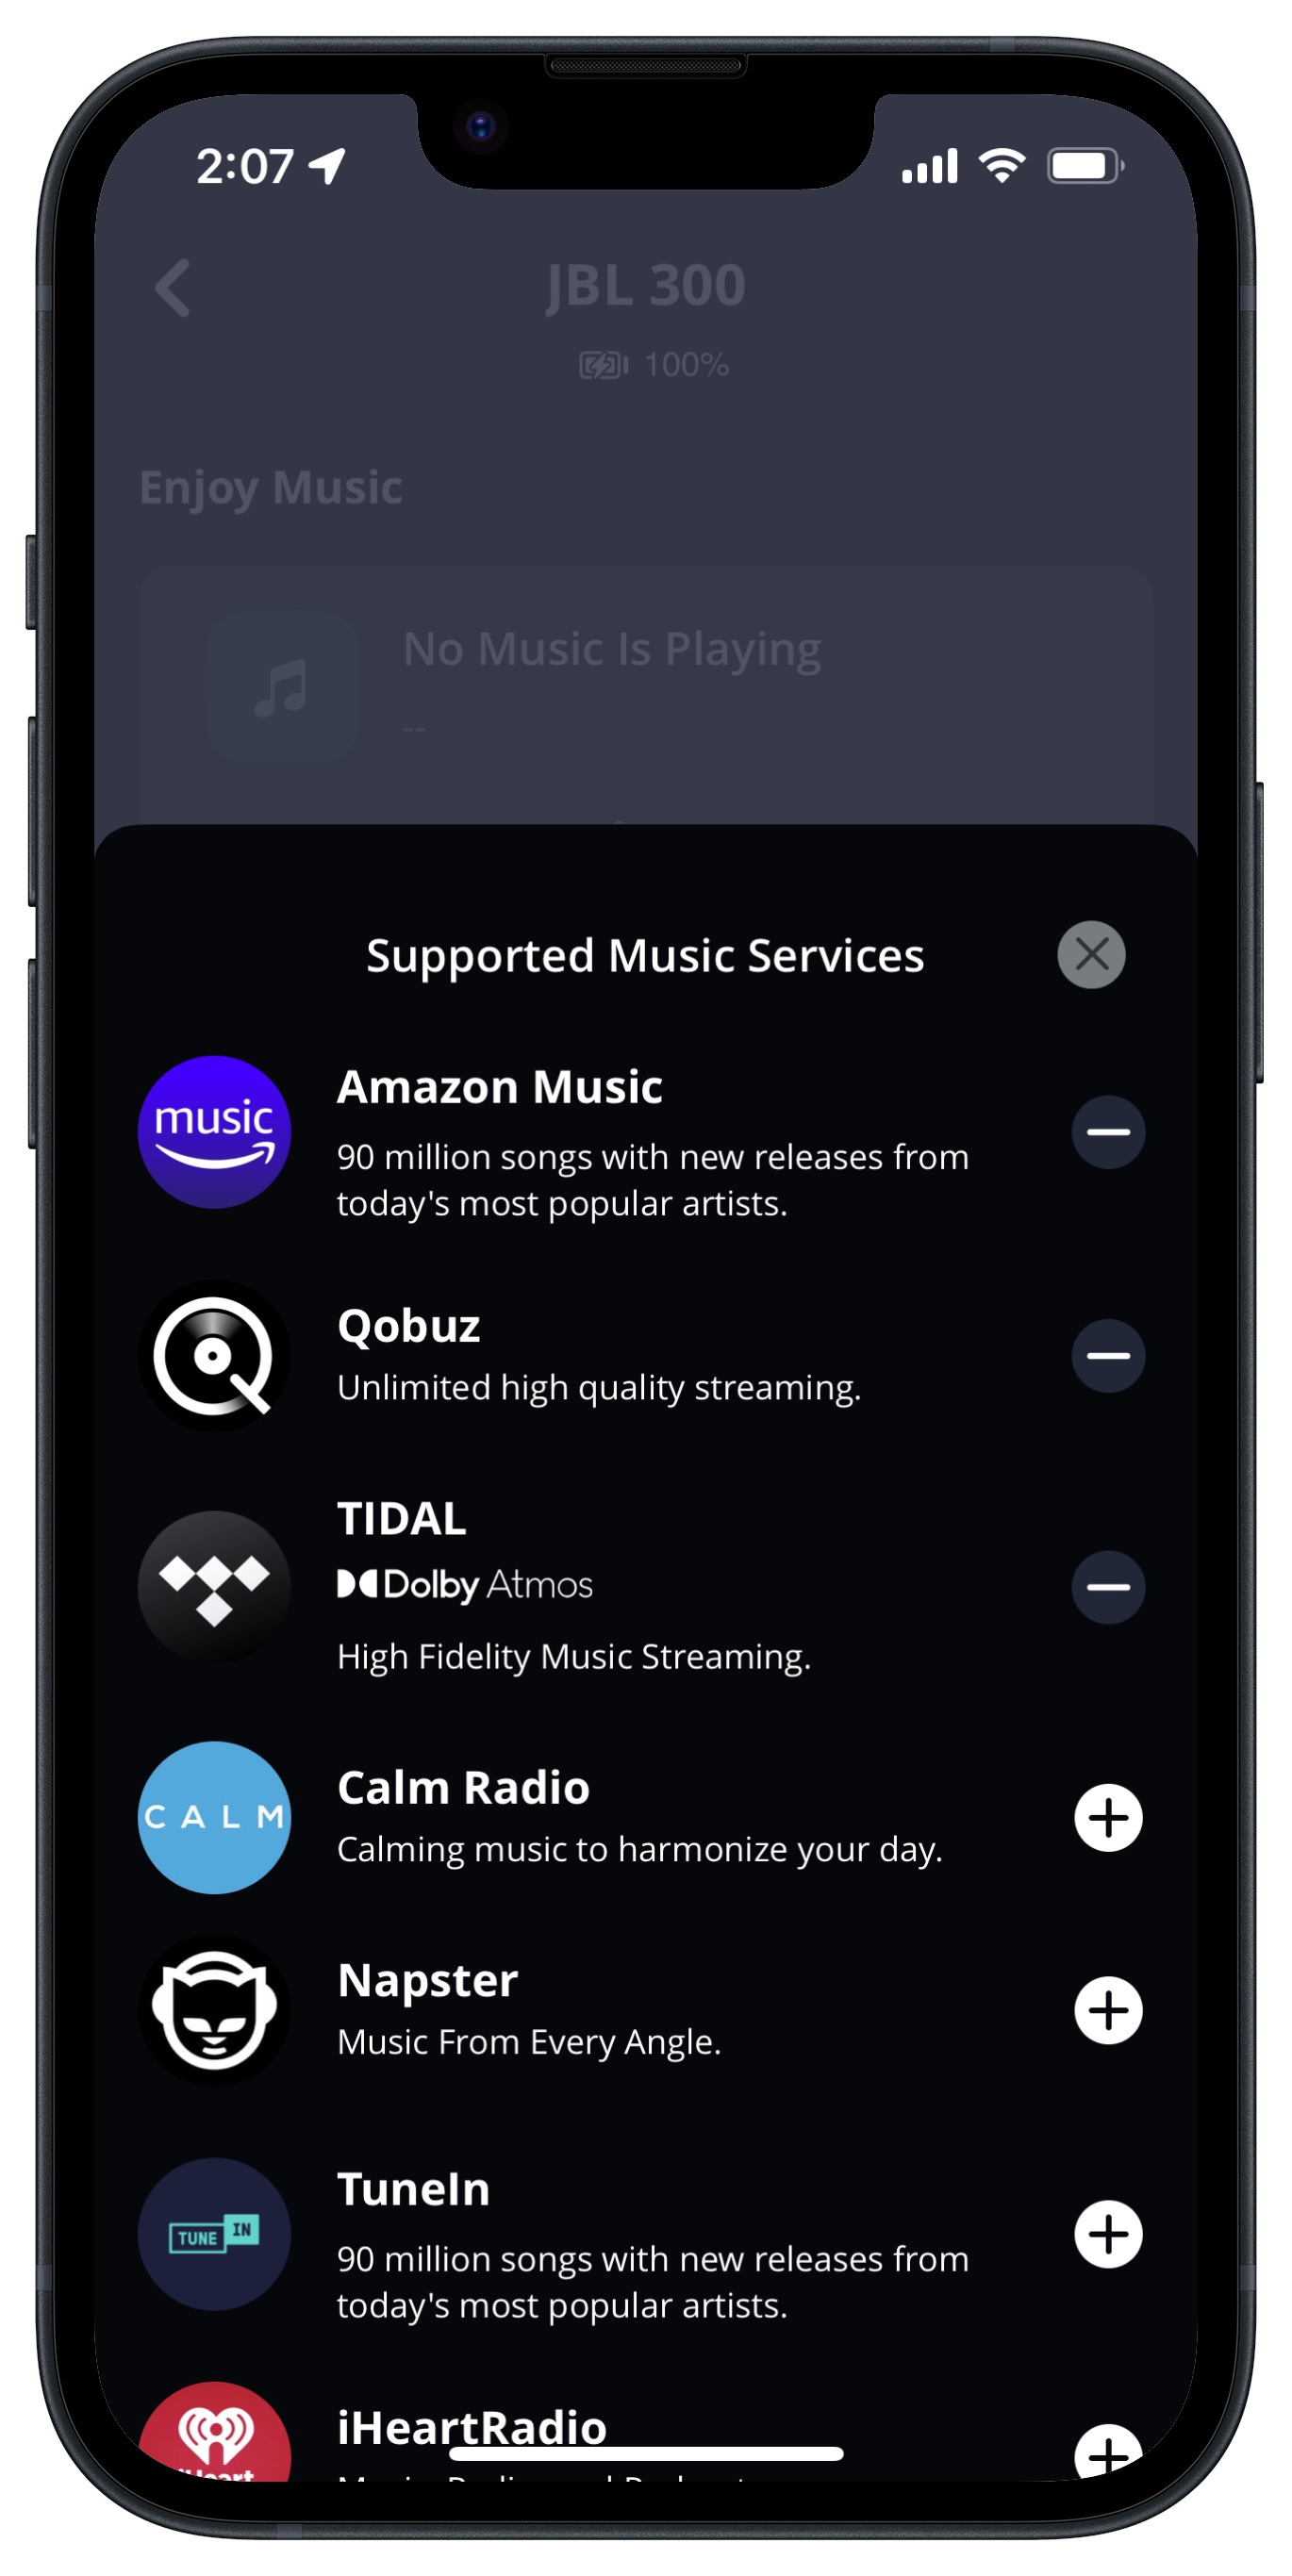 JBL One app for iOS Music service options.